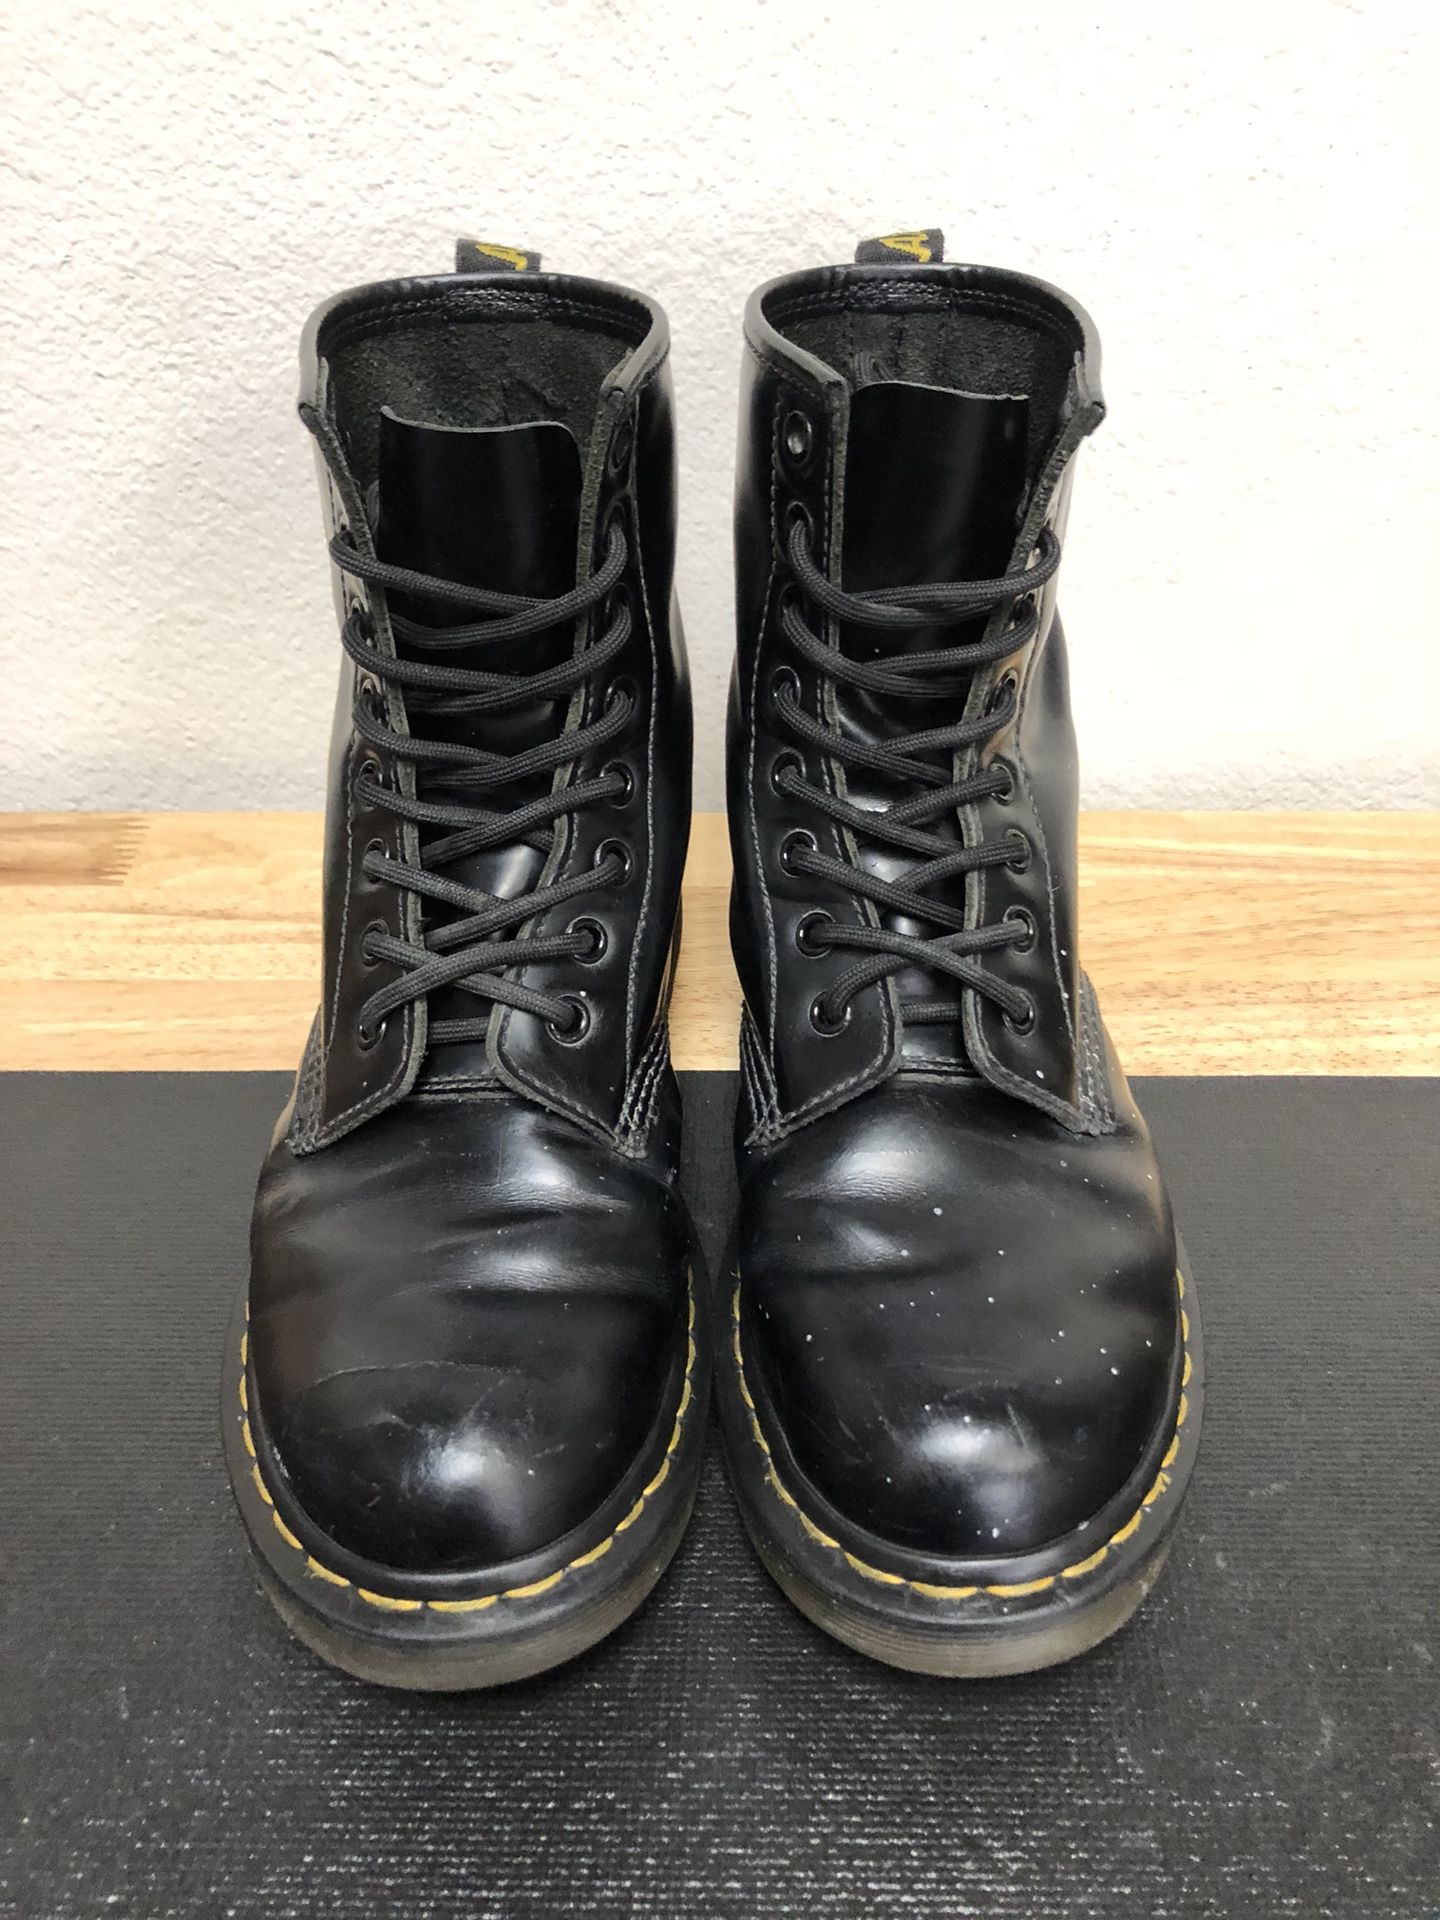 Dr Martens Classic 8 Hole Smooth Boot Women’s Size 7 UK 5